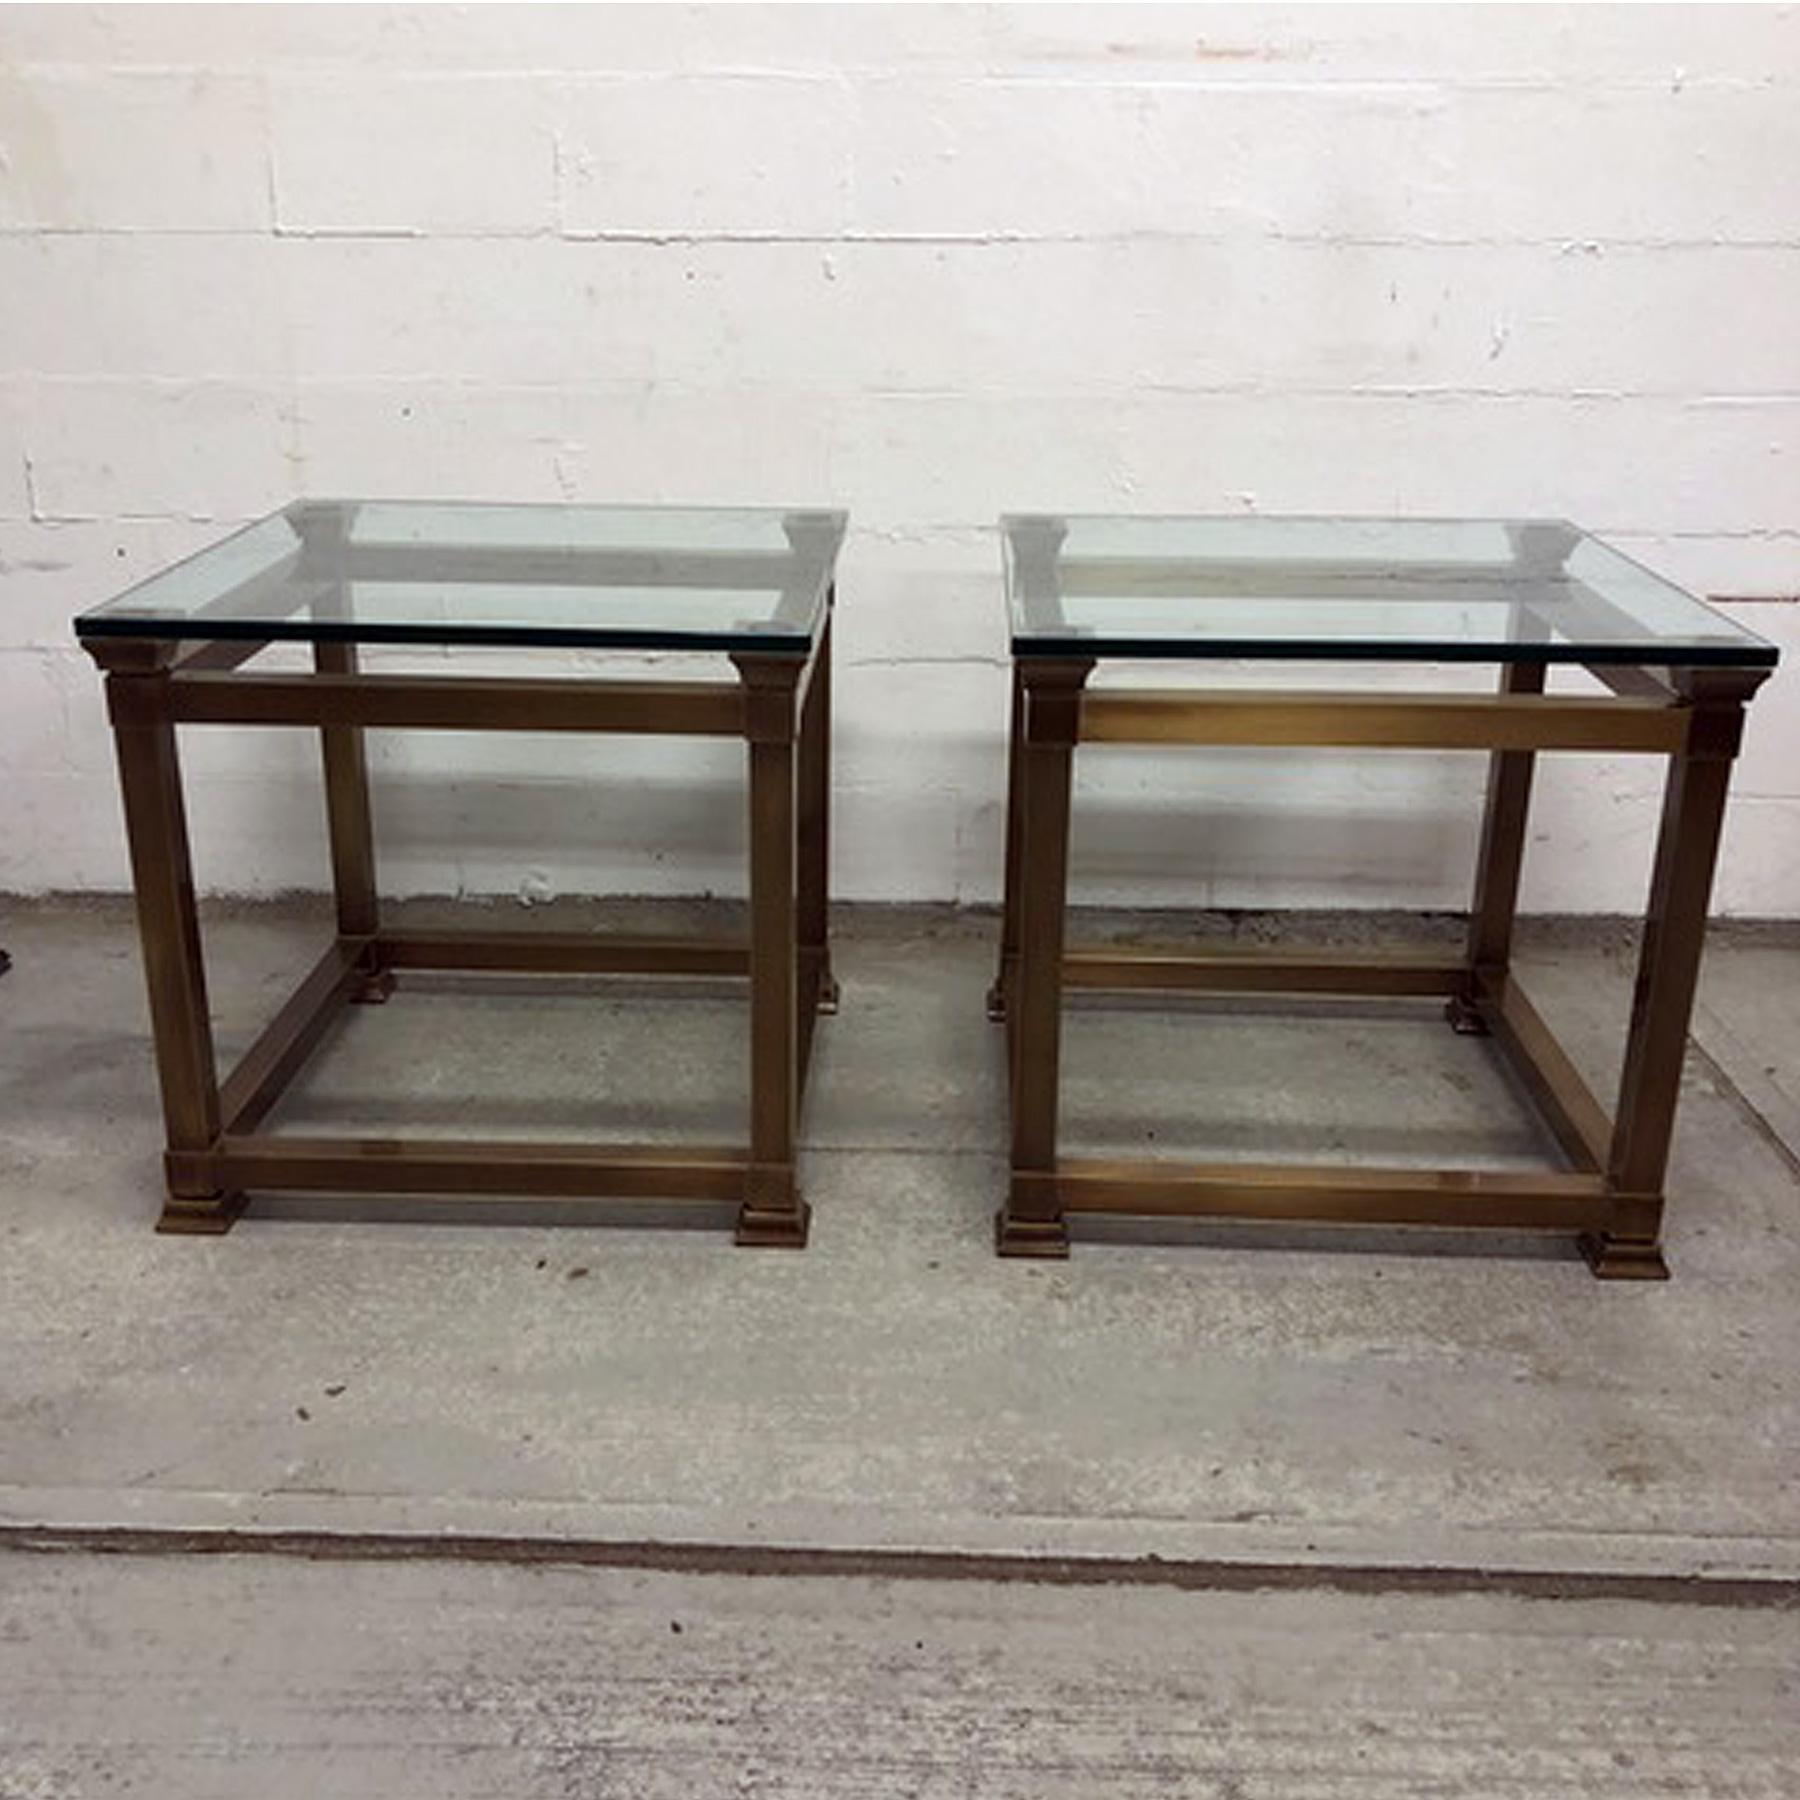 Late 20th century Heavy duty side tables. You can just tell by the weight of these tables that they are quality, hold a very strong masculine look, but could work in so many interiors.